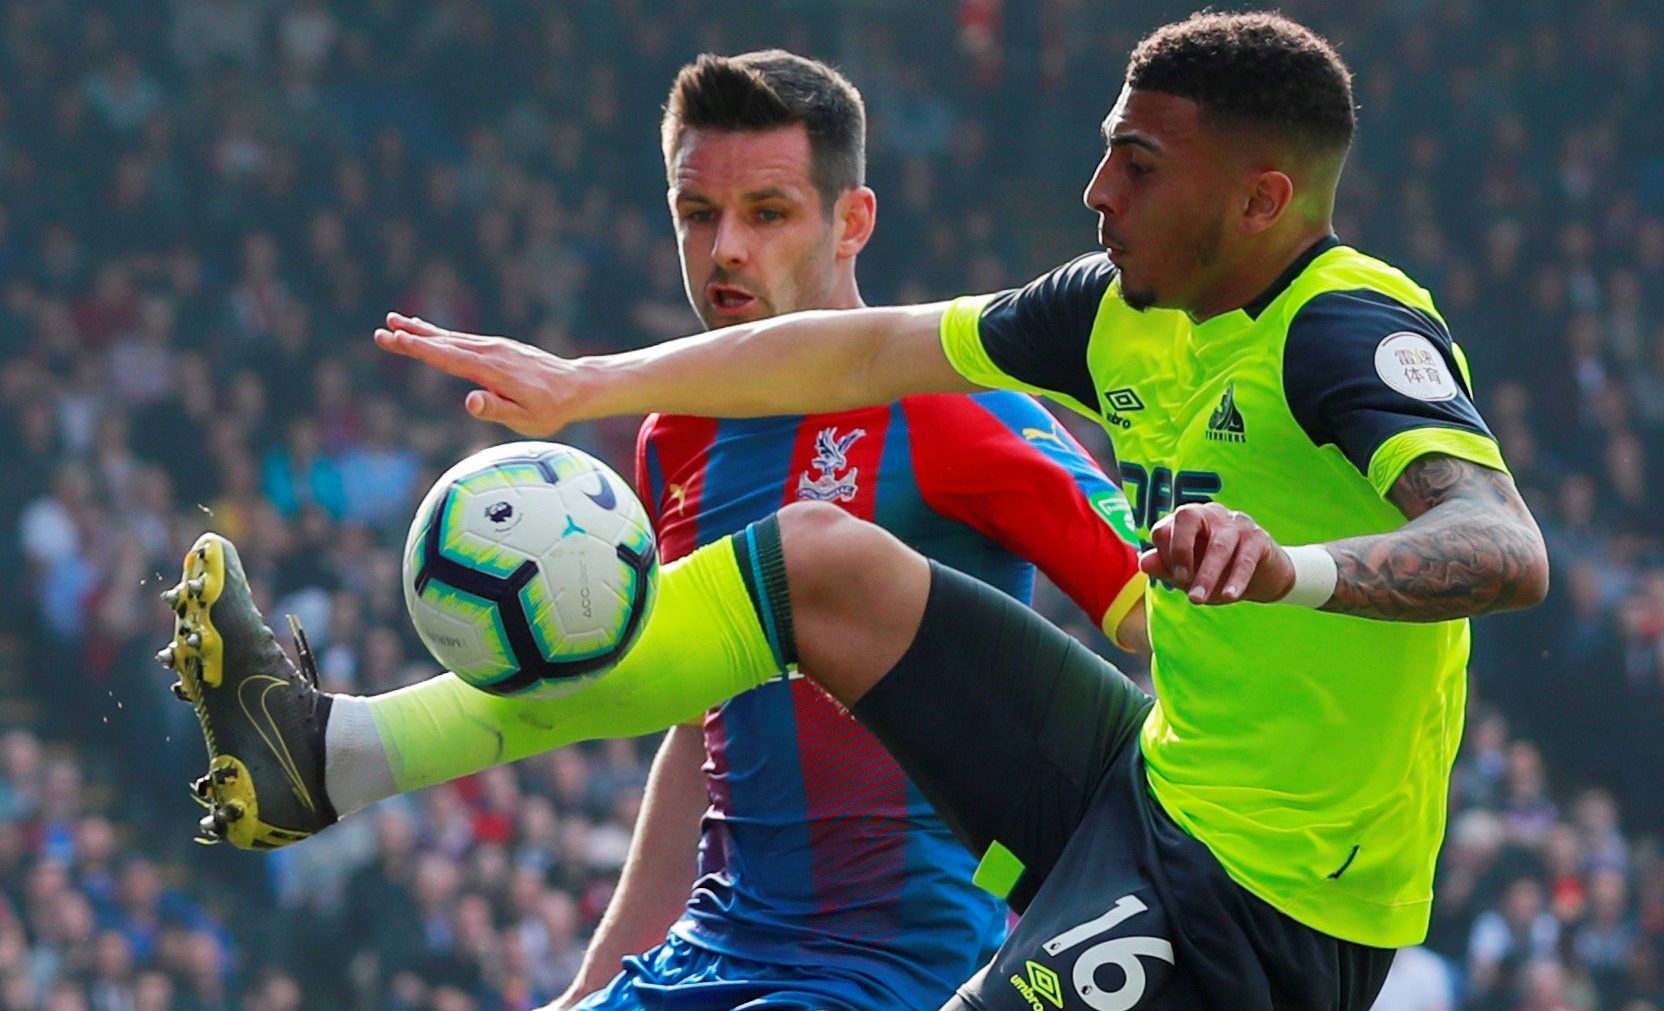 Soccer Football - Premier League - Crystal Palace v Huddersfield Town - Selhurst Park, London, Britain - March 30, 2019  Huddersfield Town's Karlan Ahearne-Grant in action with Crystal Palace's Scott Dann    Action Images via Reuters/Andrew Couldridge  EDITORIAL USE ONLY. No use with unauthorized audio, video, data, fixture lists, club/league logos or 